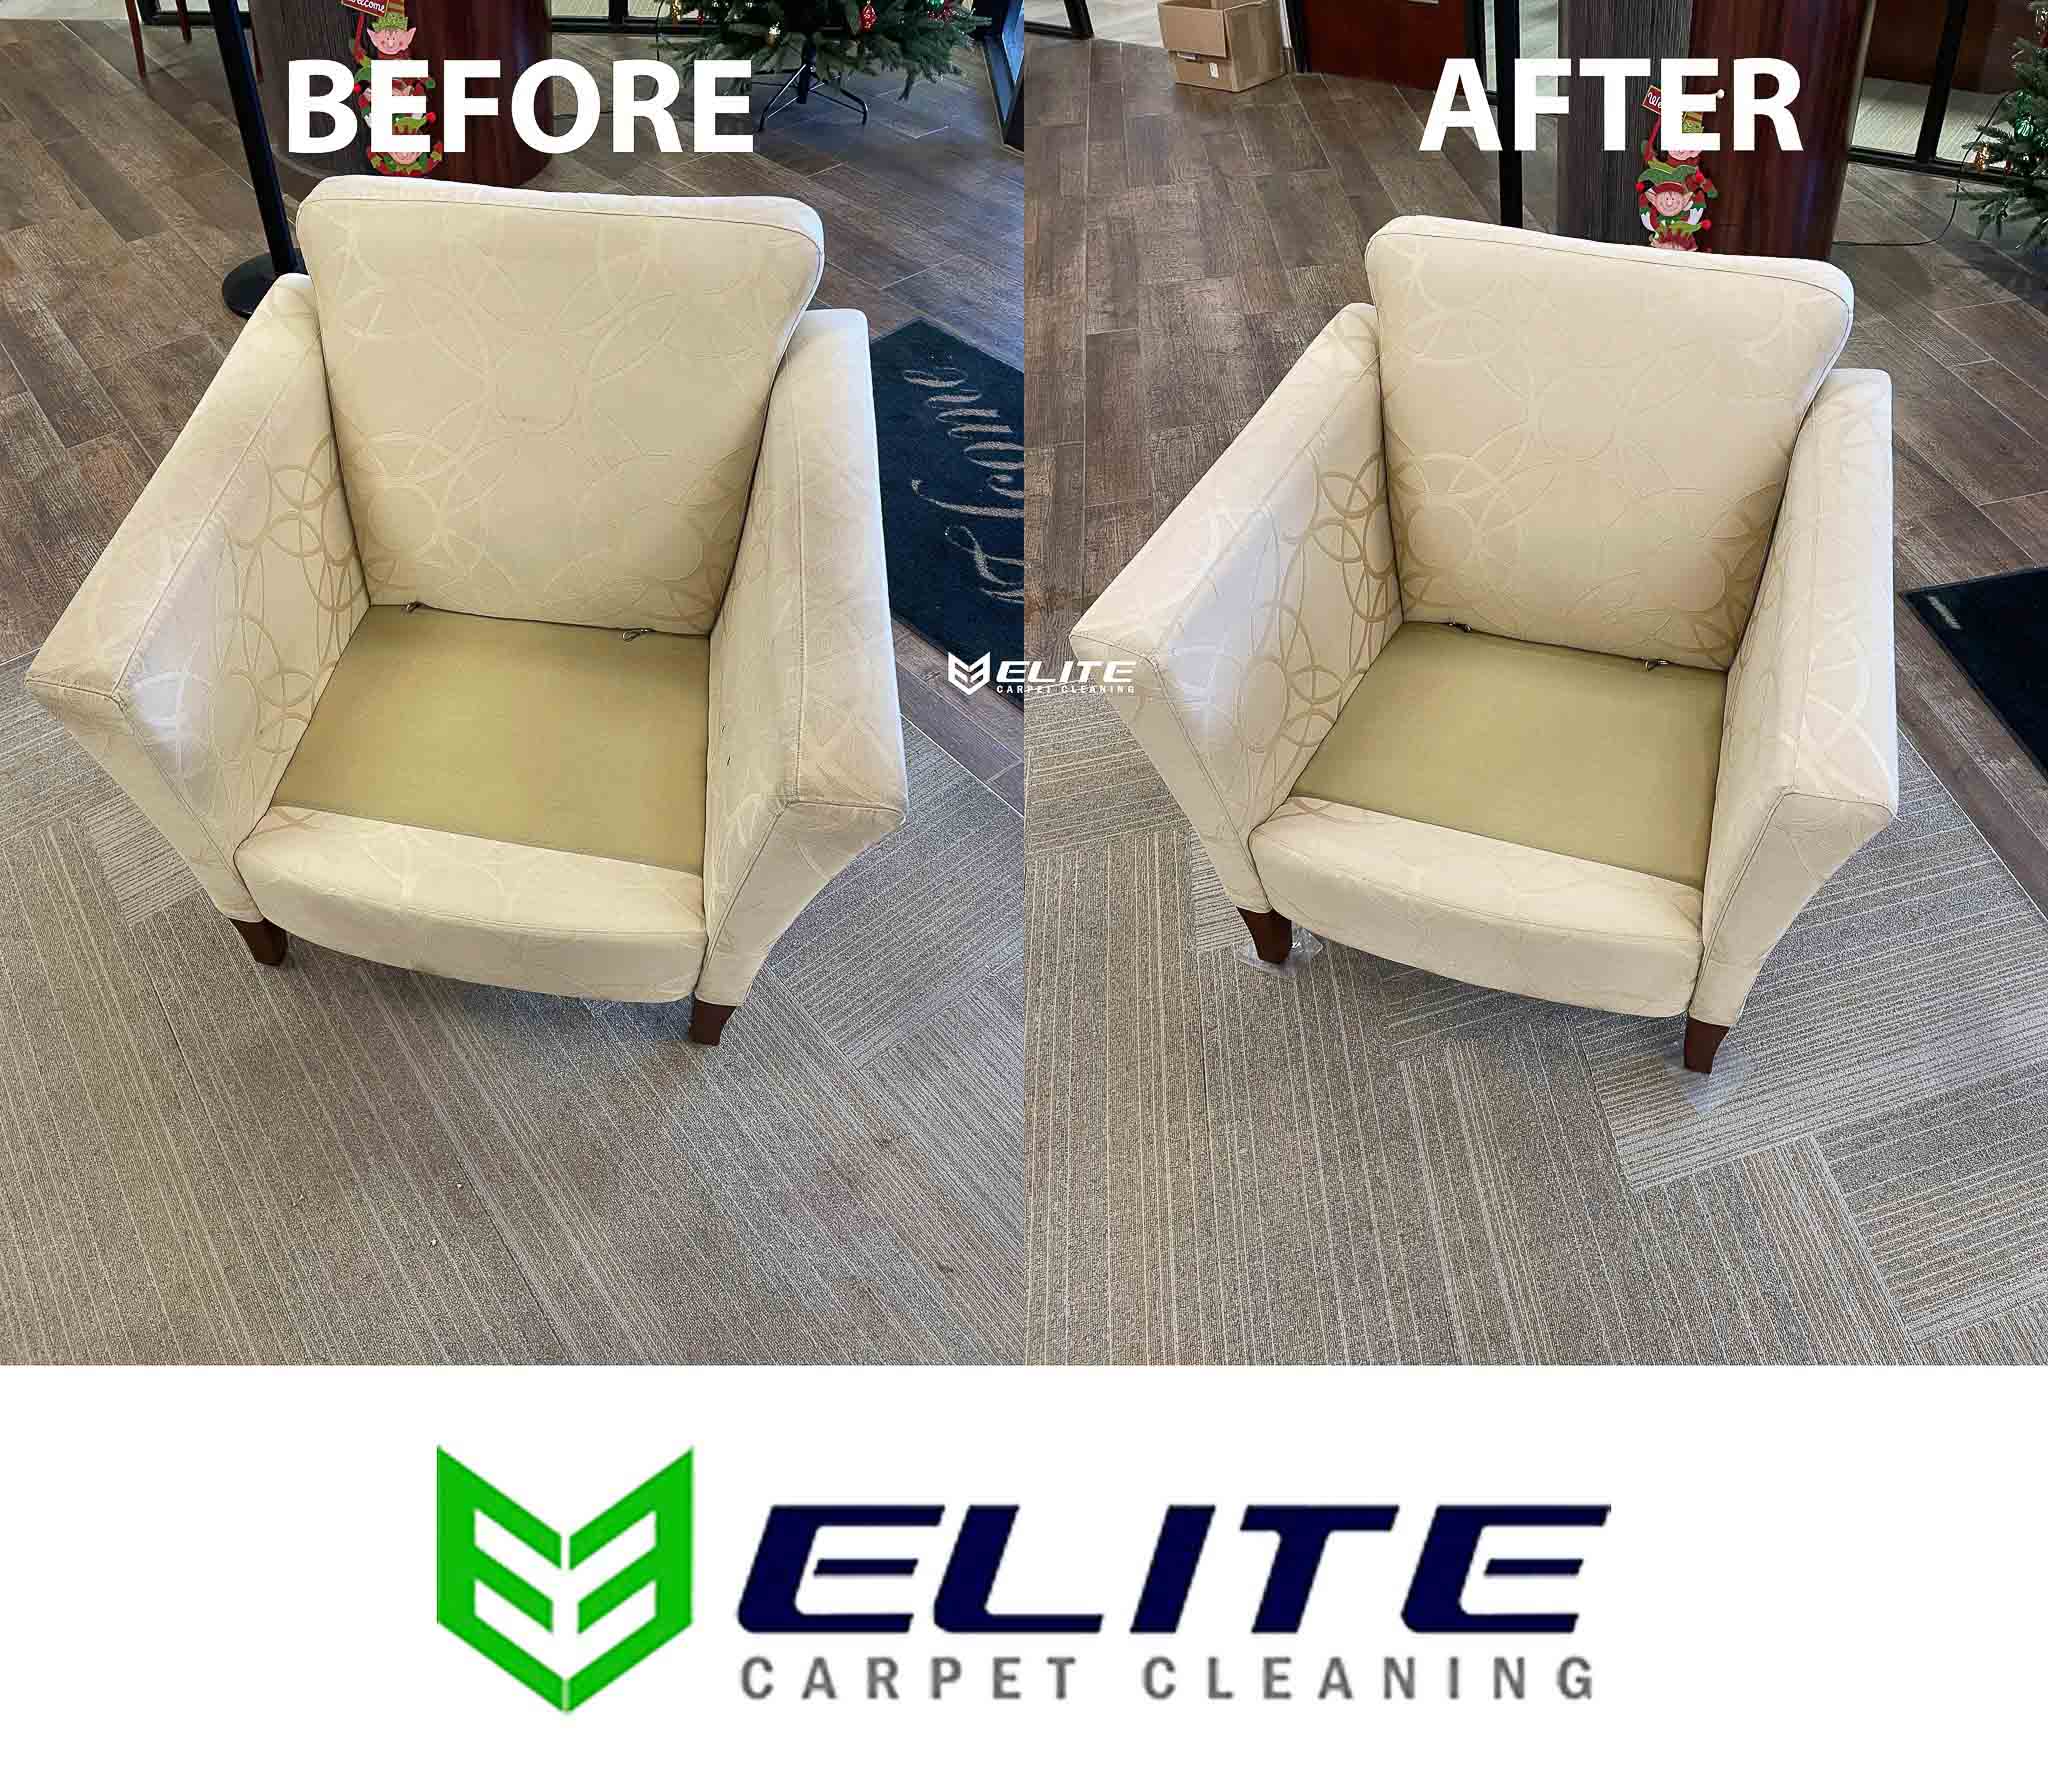 White Chair with clean upholstery in Monahans tx. This chair was cleaned by Elite Carpet cleaning.